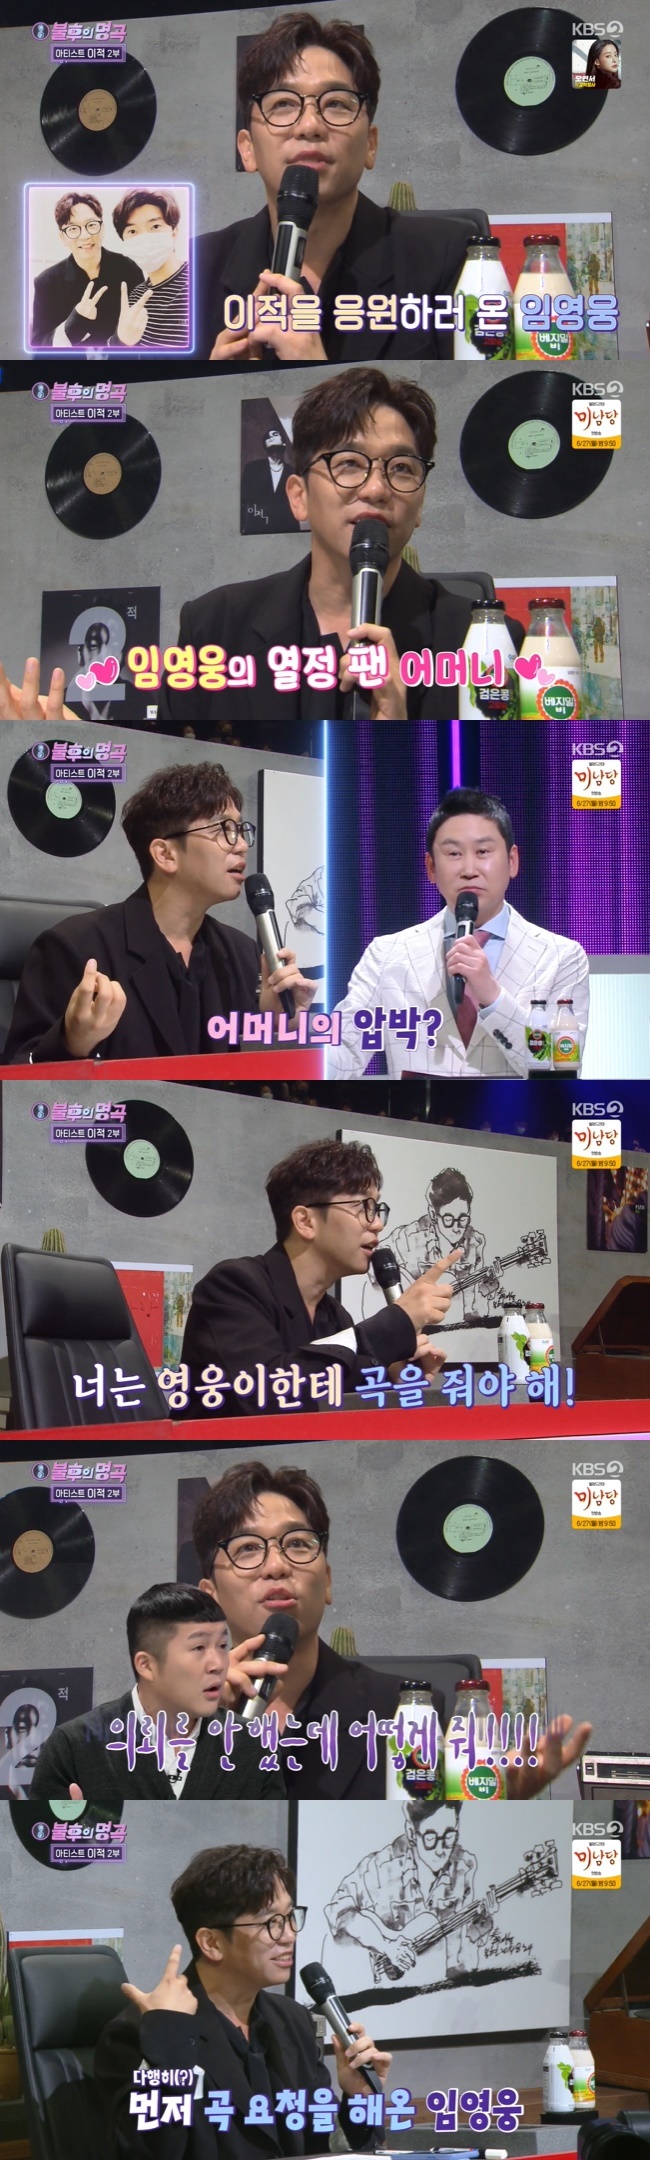 Lee Juck reveals his Mother is a big fan of Lim Young-woongKBS 2TV Immortal Songs: Singing the Legend, which was broadcast on June 18, was decorated with two parts of artist Lee Juck.On this day, he enthusiastically wrote natural things about the stories about what he learned about Corona 19.Lee Juck, who completed the song in just 10 minutes, said, At first I was going to write a love song, but now I saw something that I thought most in my mind.I tried to write the story in lyrics, and I soon wrote it.I never did that before, but I put my cell phone on and uploaded it to SNS by the piano. He explained that he was going to release the sound source after the stage called by the children at Baeksang Arts Awards.Shin Dong-yup said, In fact, many singers ask and threaten Lee Juck to receive the song, but Choi Jung-in gave him a solo song called I hate you. Recently, he made Lim Young-woong a song Can I meet again.Last week, Mr. Lim Young-woong came to say hello for a while. How did it come out?Lee Juck replied, Mother is a big fan of Lim Young-woong.When Shin Dong-yup asked, If Mother does not write Lim Young-woong song, it feels like this. Lee Juck said, Really, you have to give Heroi a song.I knew what Mr. Jo Se-ho was thinking. I didnt ask, but I didnt.I wrote a song because I asked for a song, but it became a title. Many people saved it because the album came out. Thank you. 